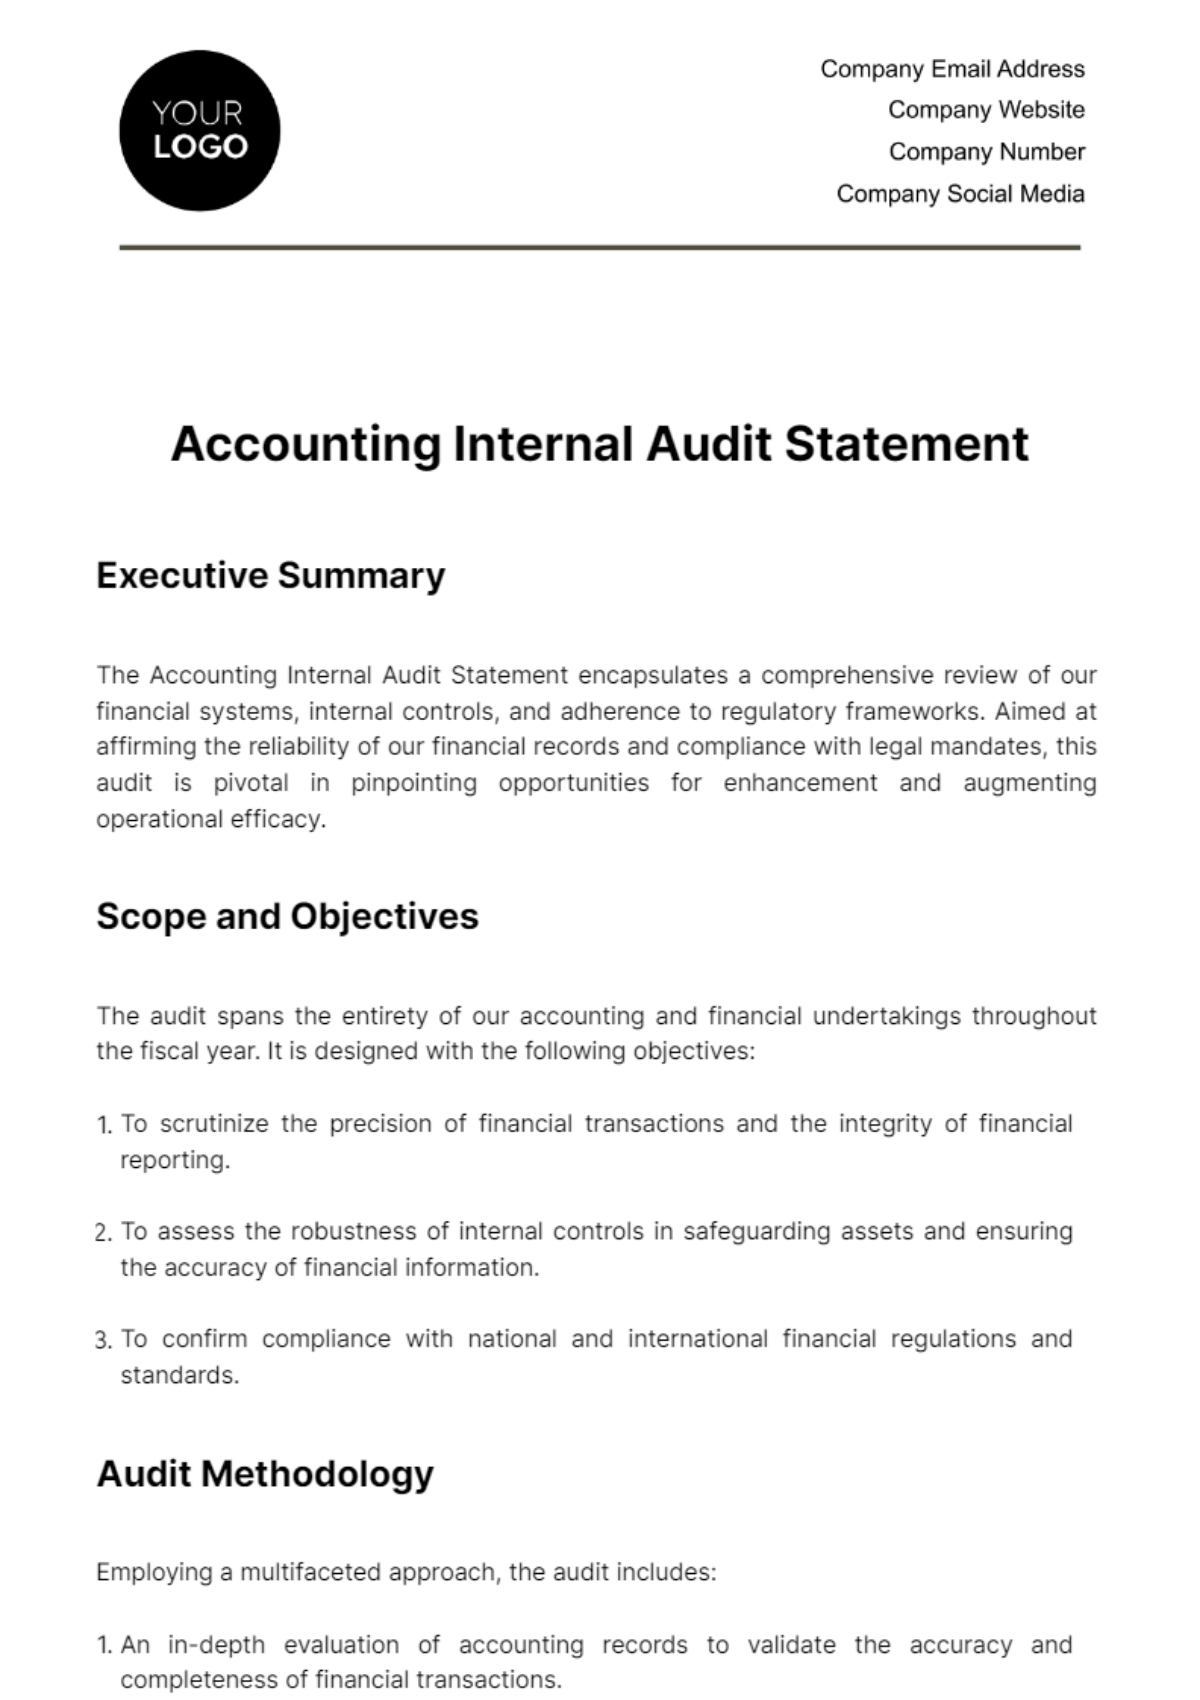 Accounting Internal Audit Statement Template